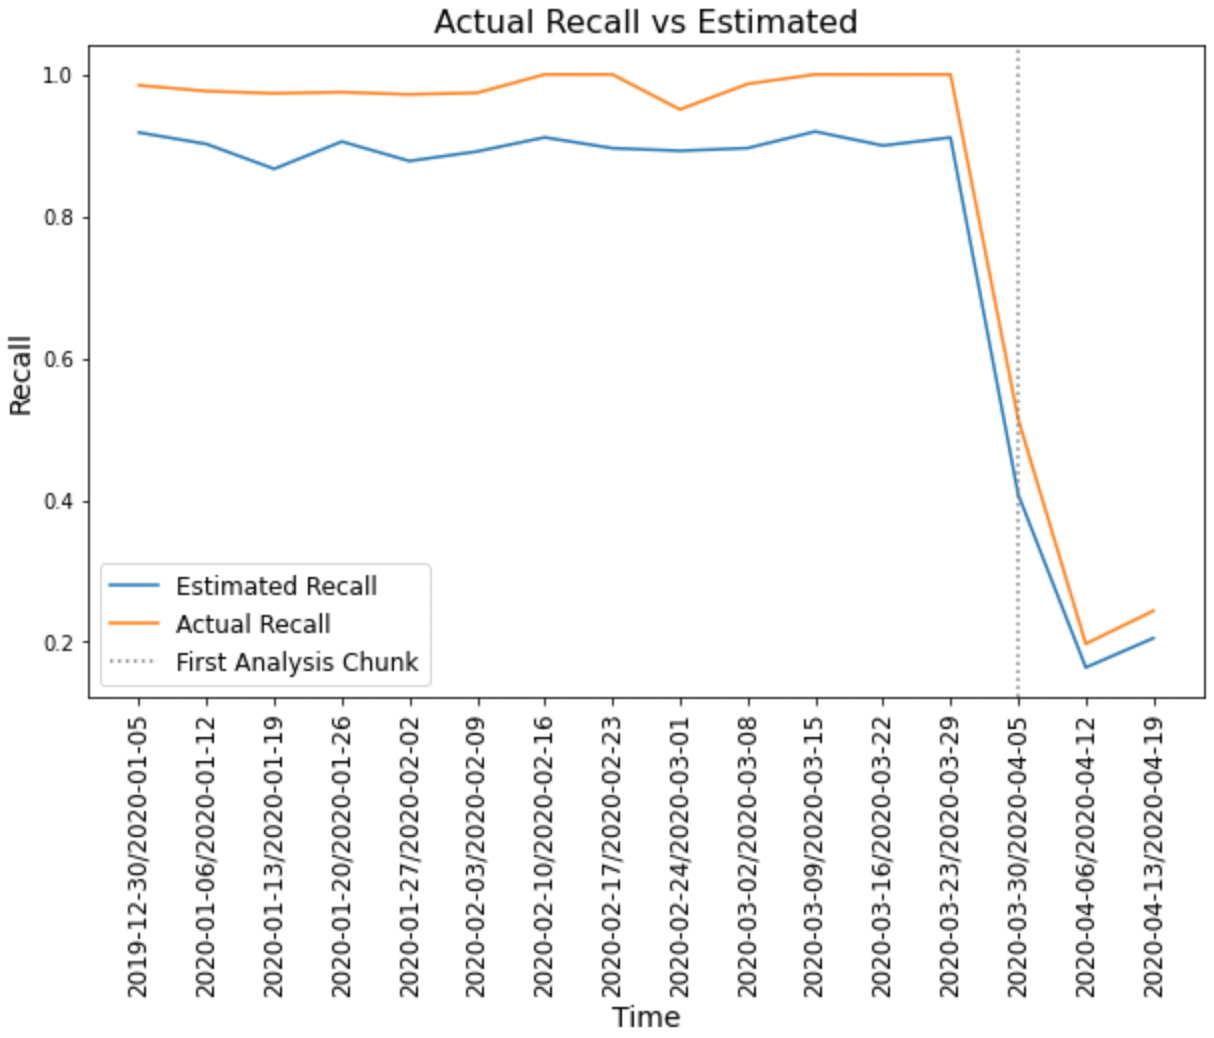 Figure 7: Actual Recall vs Estimated (Image by Author).